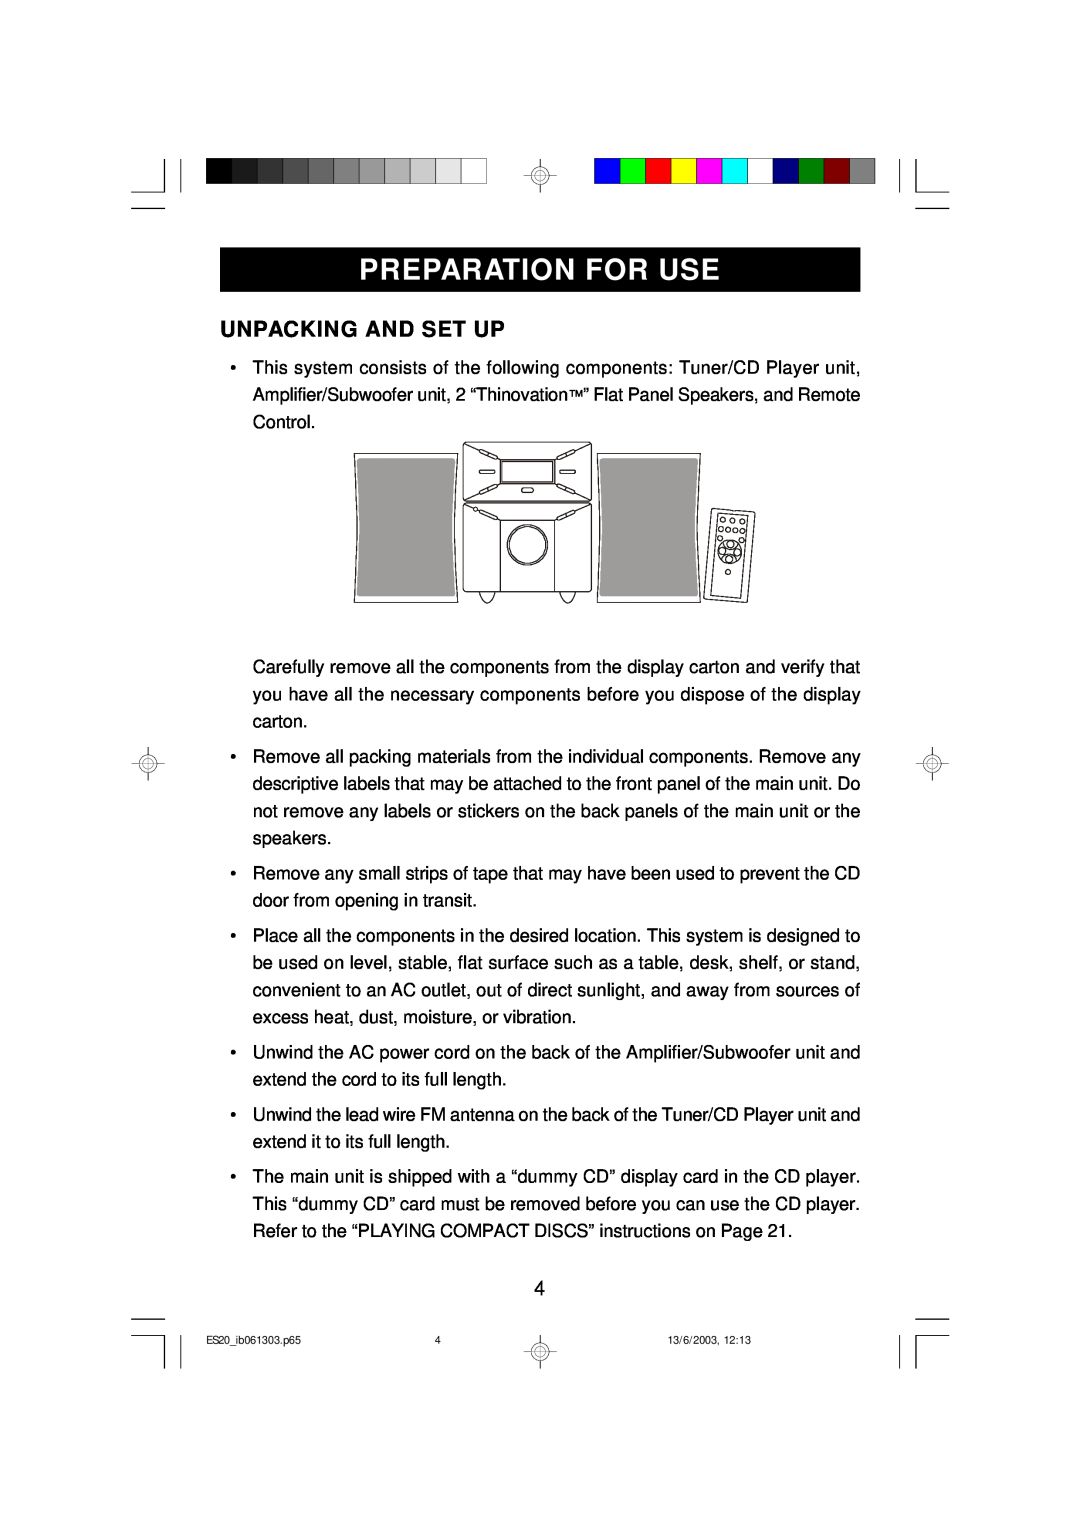 Emerson ES20 owner manual Preparation For Use, Unpacking And Set Up 